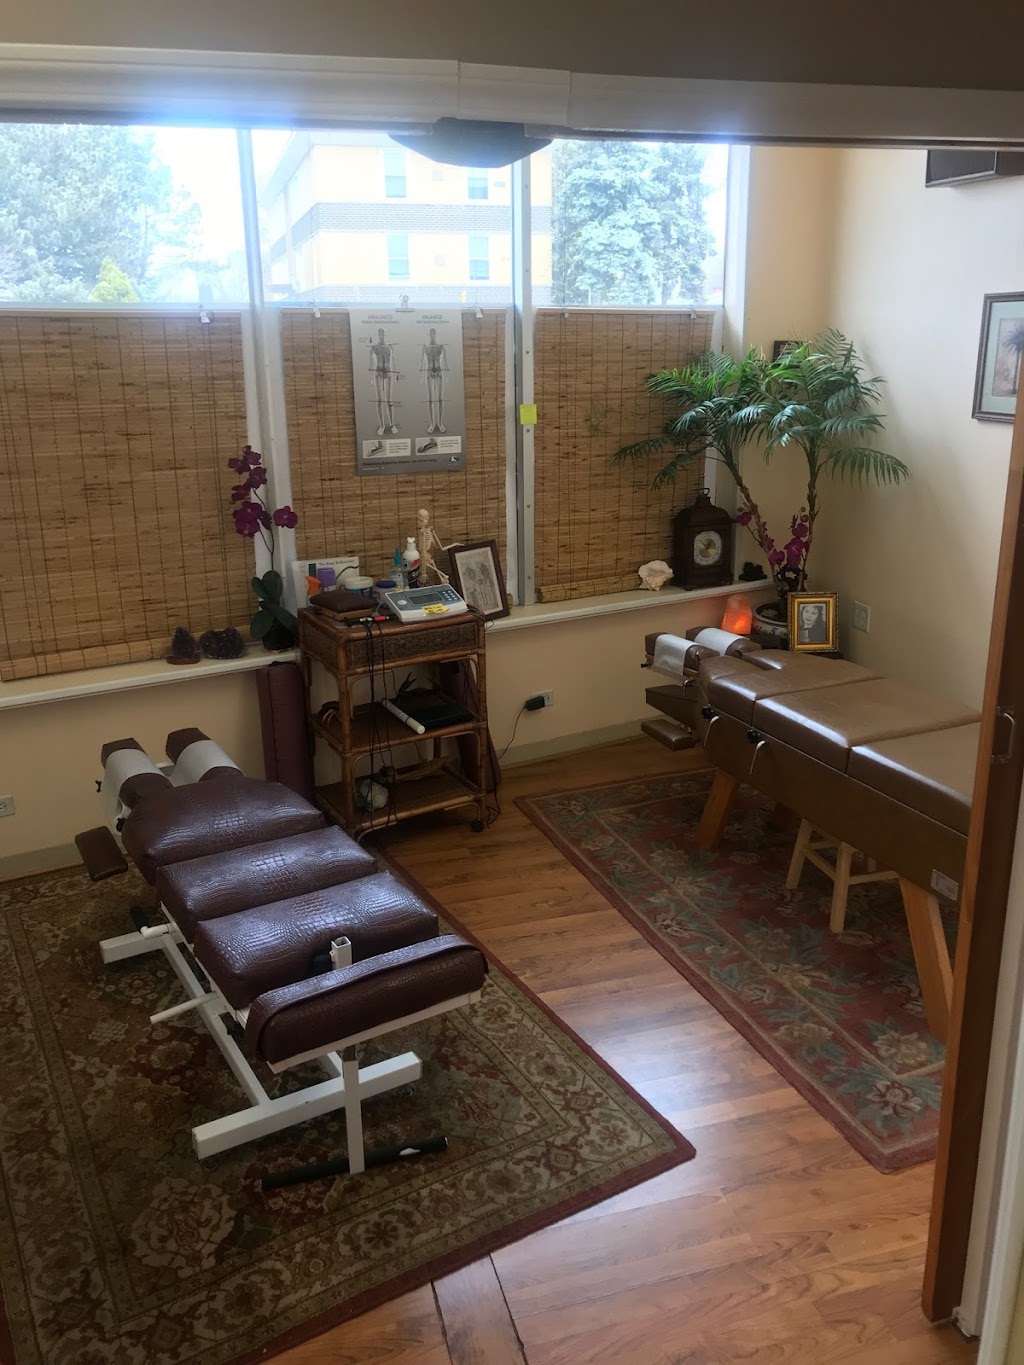 American Chiropractic Care | 8951 Cermak Rd, Riverside, IL 60546, USA | Phone: (708) 447-4800